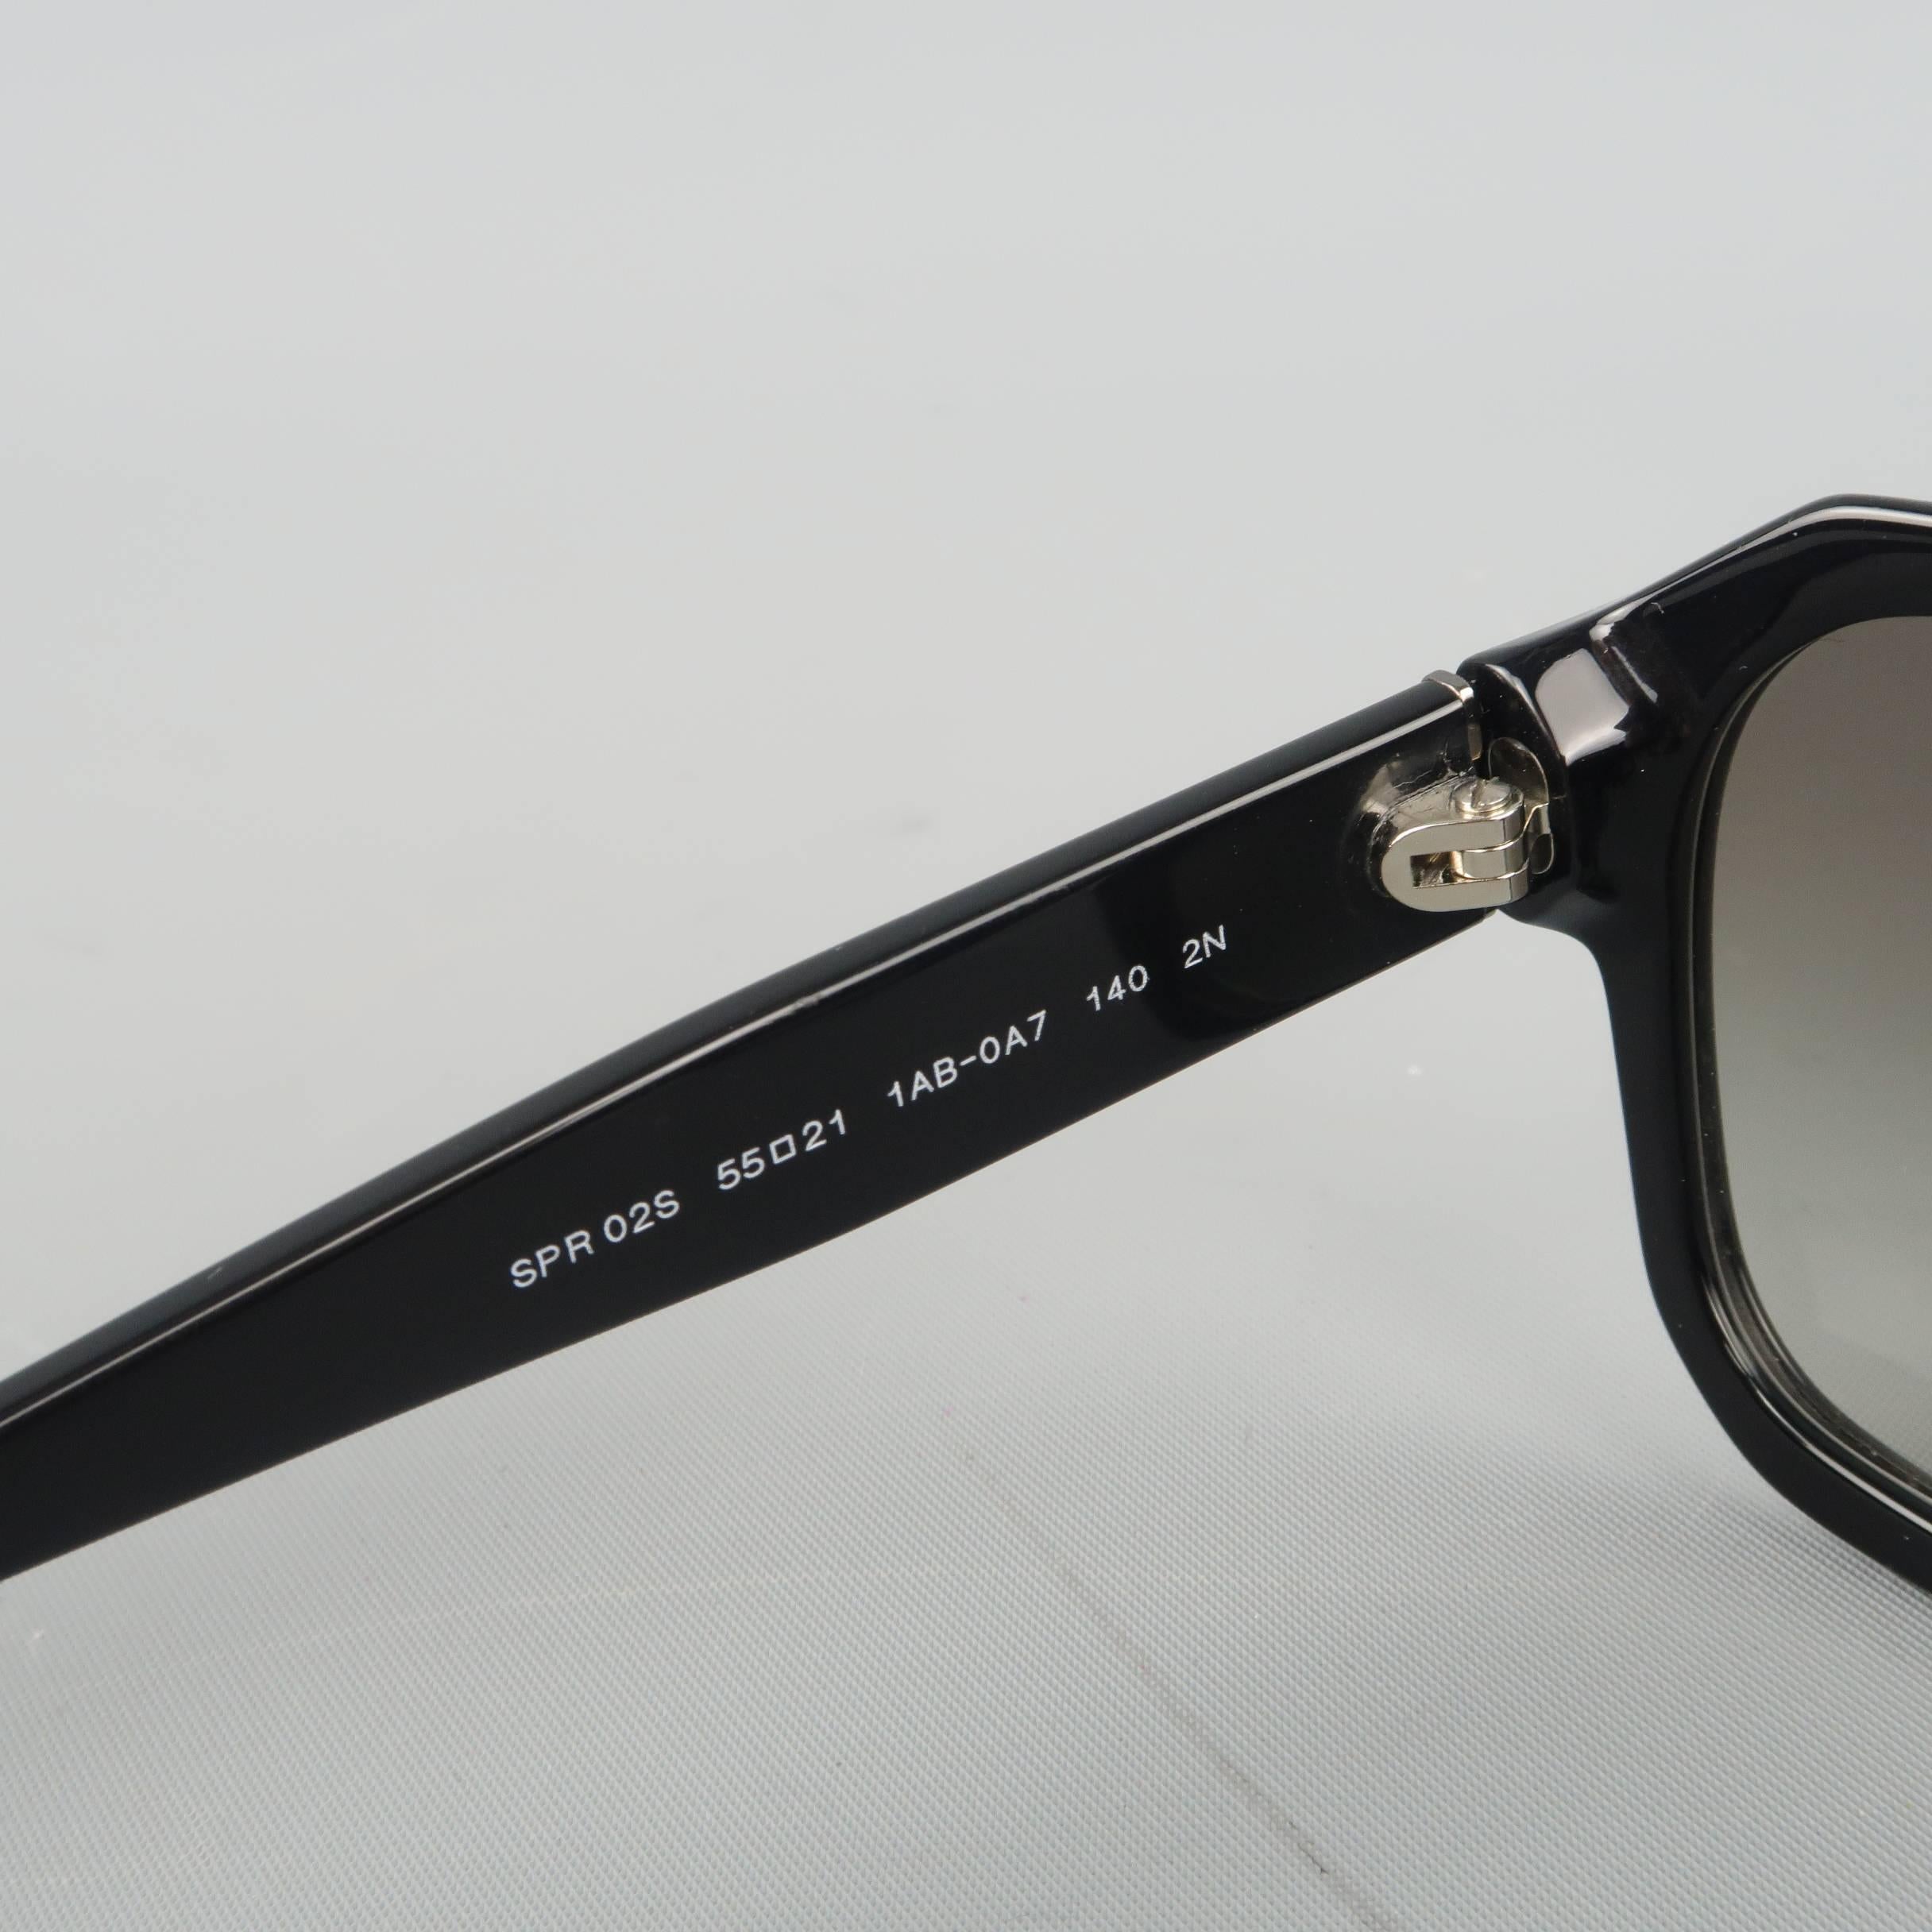 PRADA flat top sunglasses come in glossy black acetate with angular shape, taupe gradient lenses and silver tone logo arms. Minor wear. As-is. Made in Italy.
 
Fair Pre-Owned Condition.
Marked: SPR 02S 55 21 1AB-0A7 140 2N
 
Measurements:
 
Length: